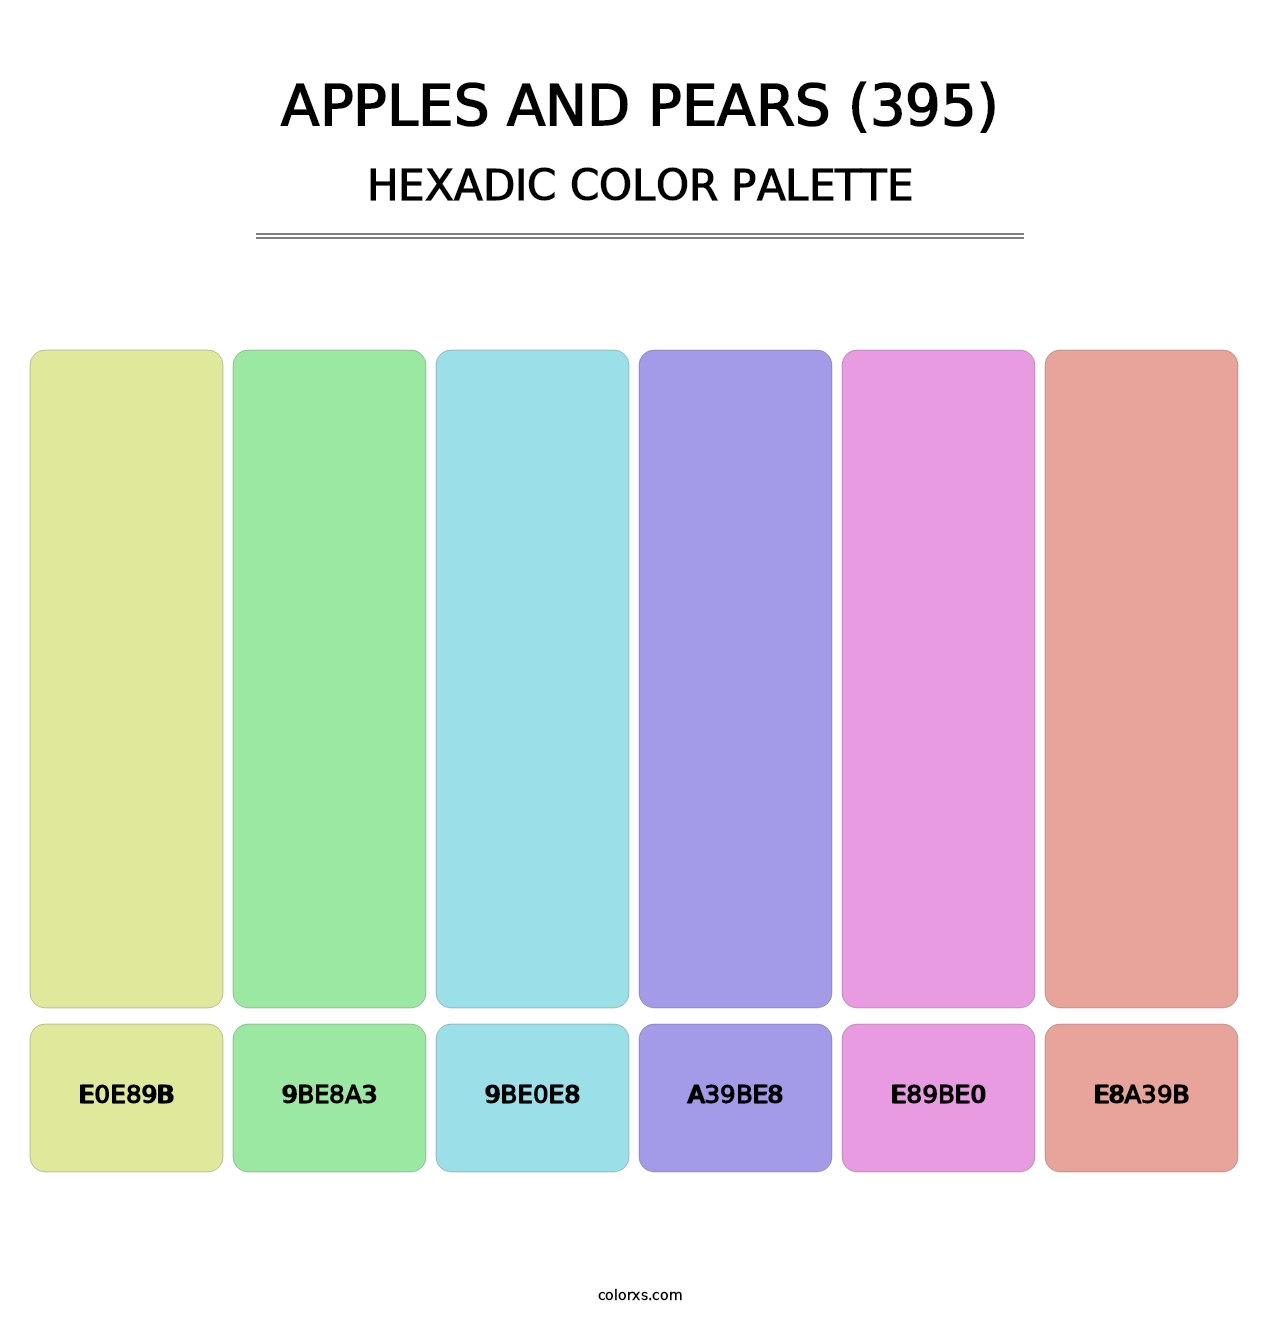 Apples and Pears (395) - Hexadic Color Palette